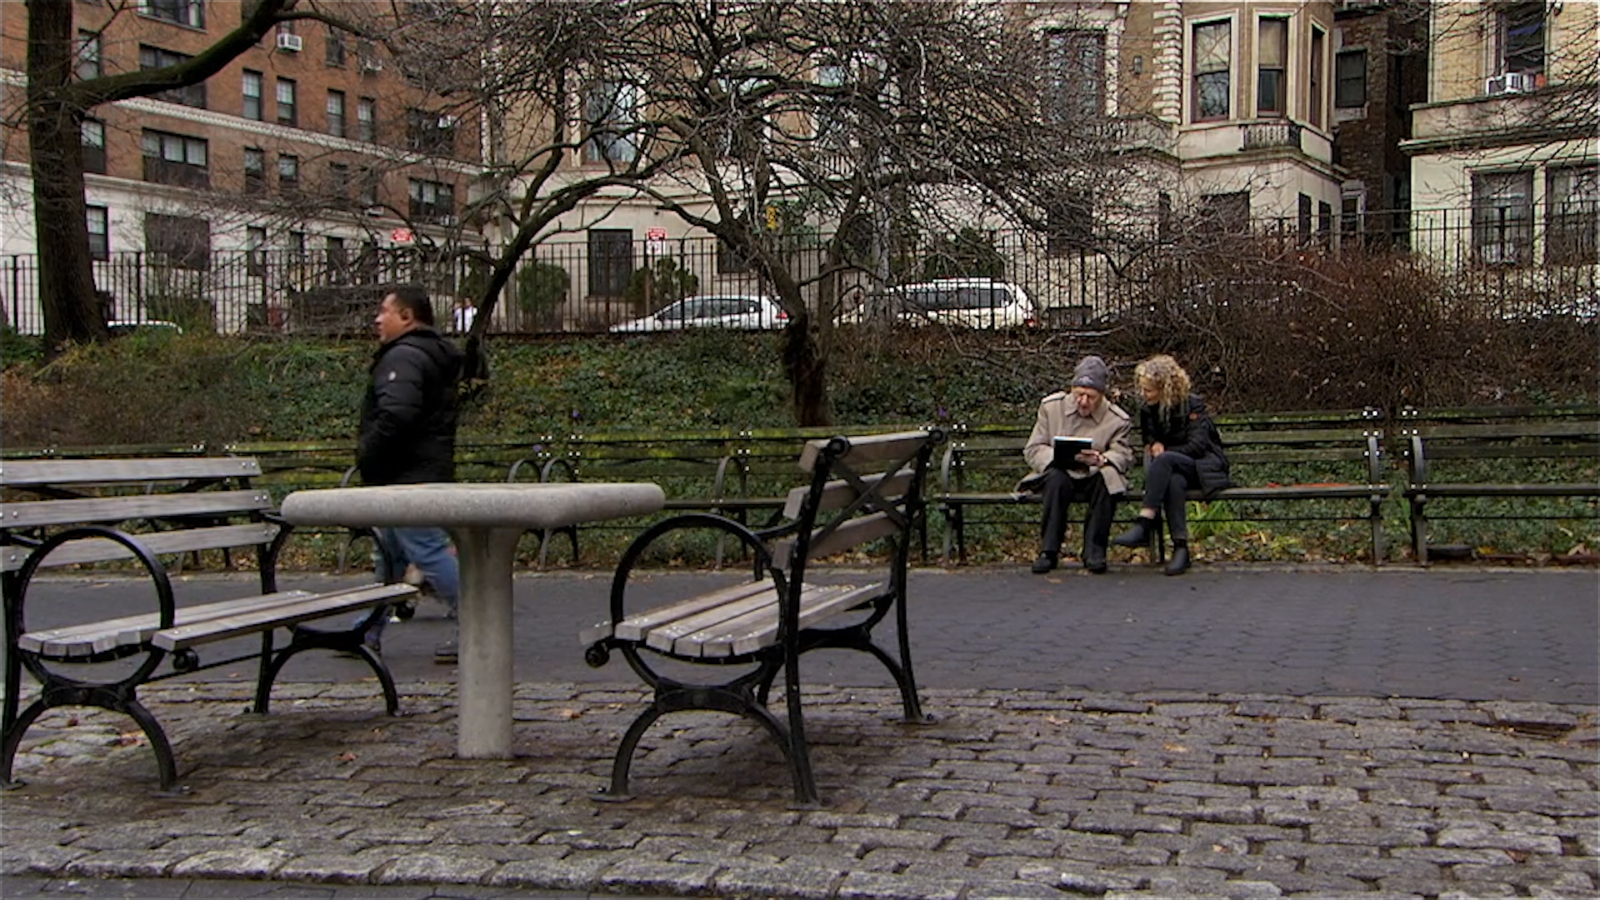 In a still from the film, "Serge Hollerbach: A Russian Painter in New York," Serge Hollerbach and Olga Nenazhivina sit together on a bench in Riverside Park. Serge is wearing a beige coat and cap and is drawing in his sketchbook. Olga, who has curly blonde hair, is leaning towards him to see what he is doing. A pedestrian in a puffy jacket with clippered hair has just passed by in front of them.